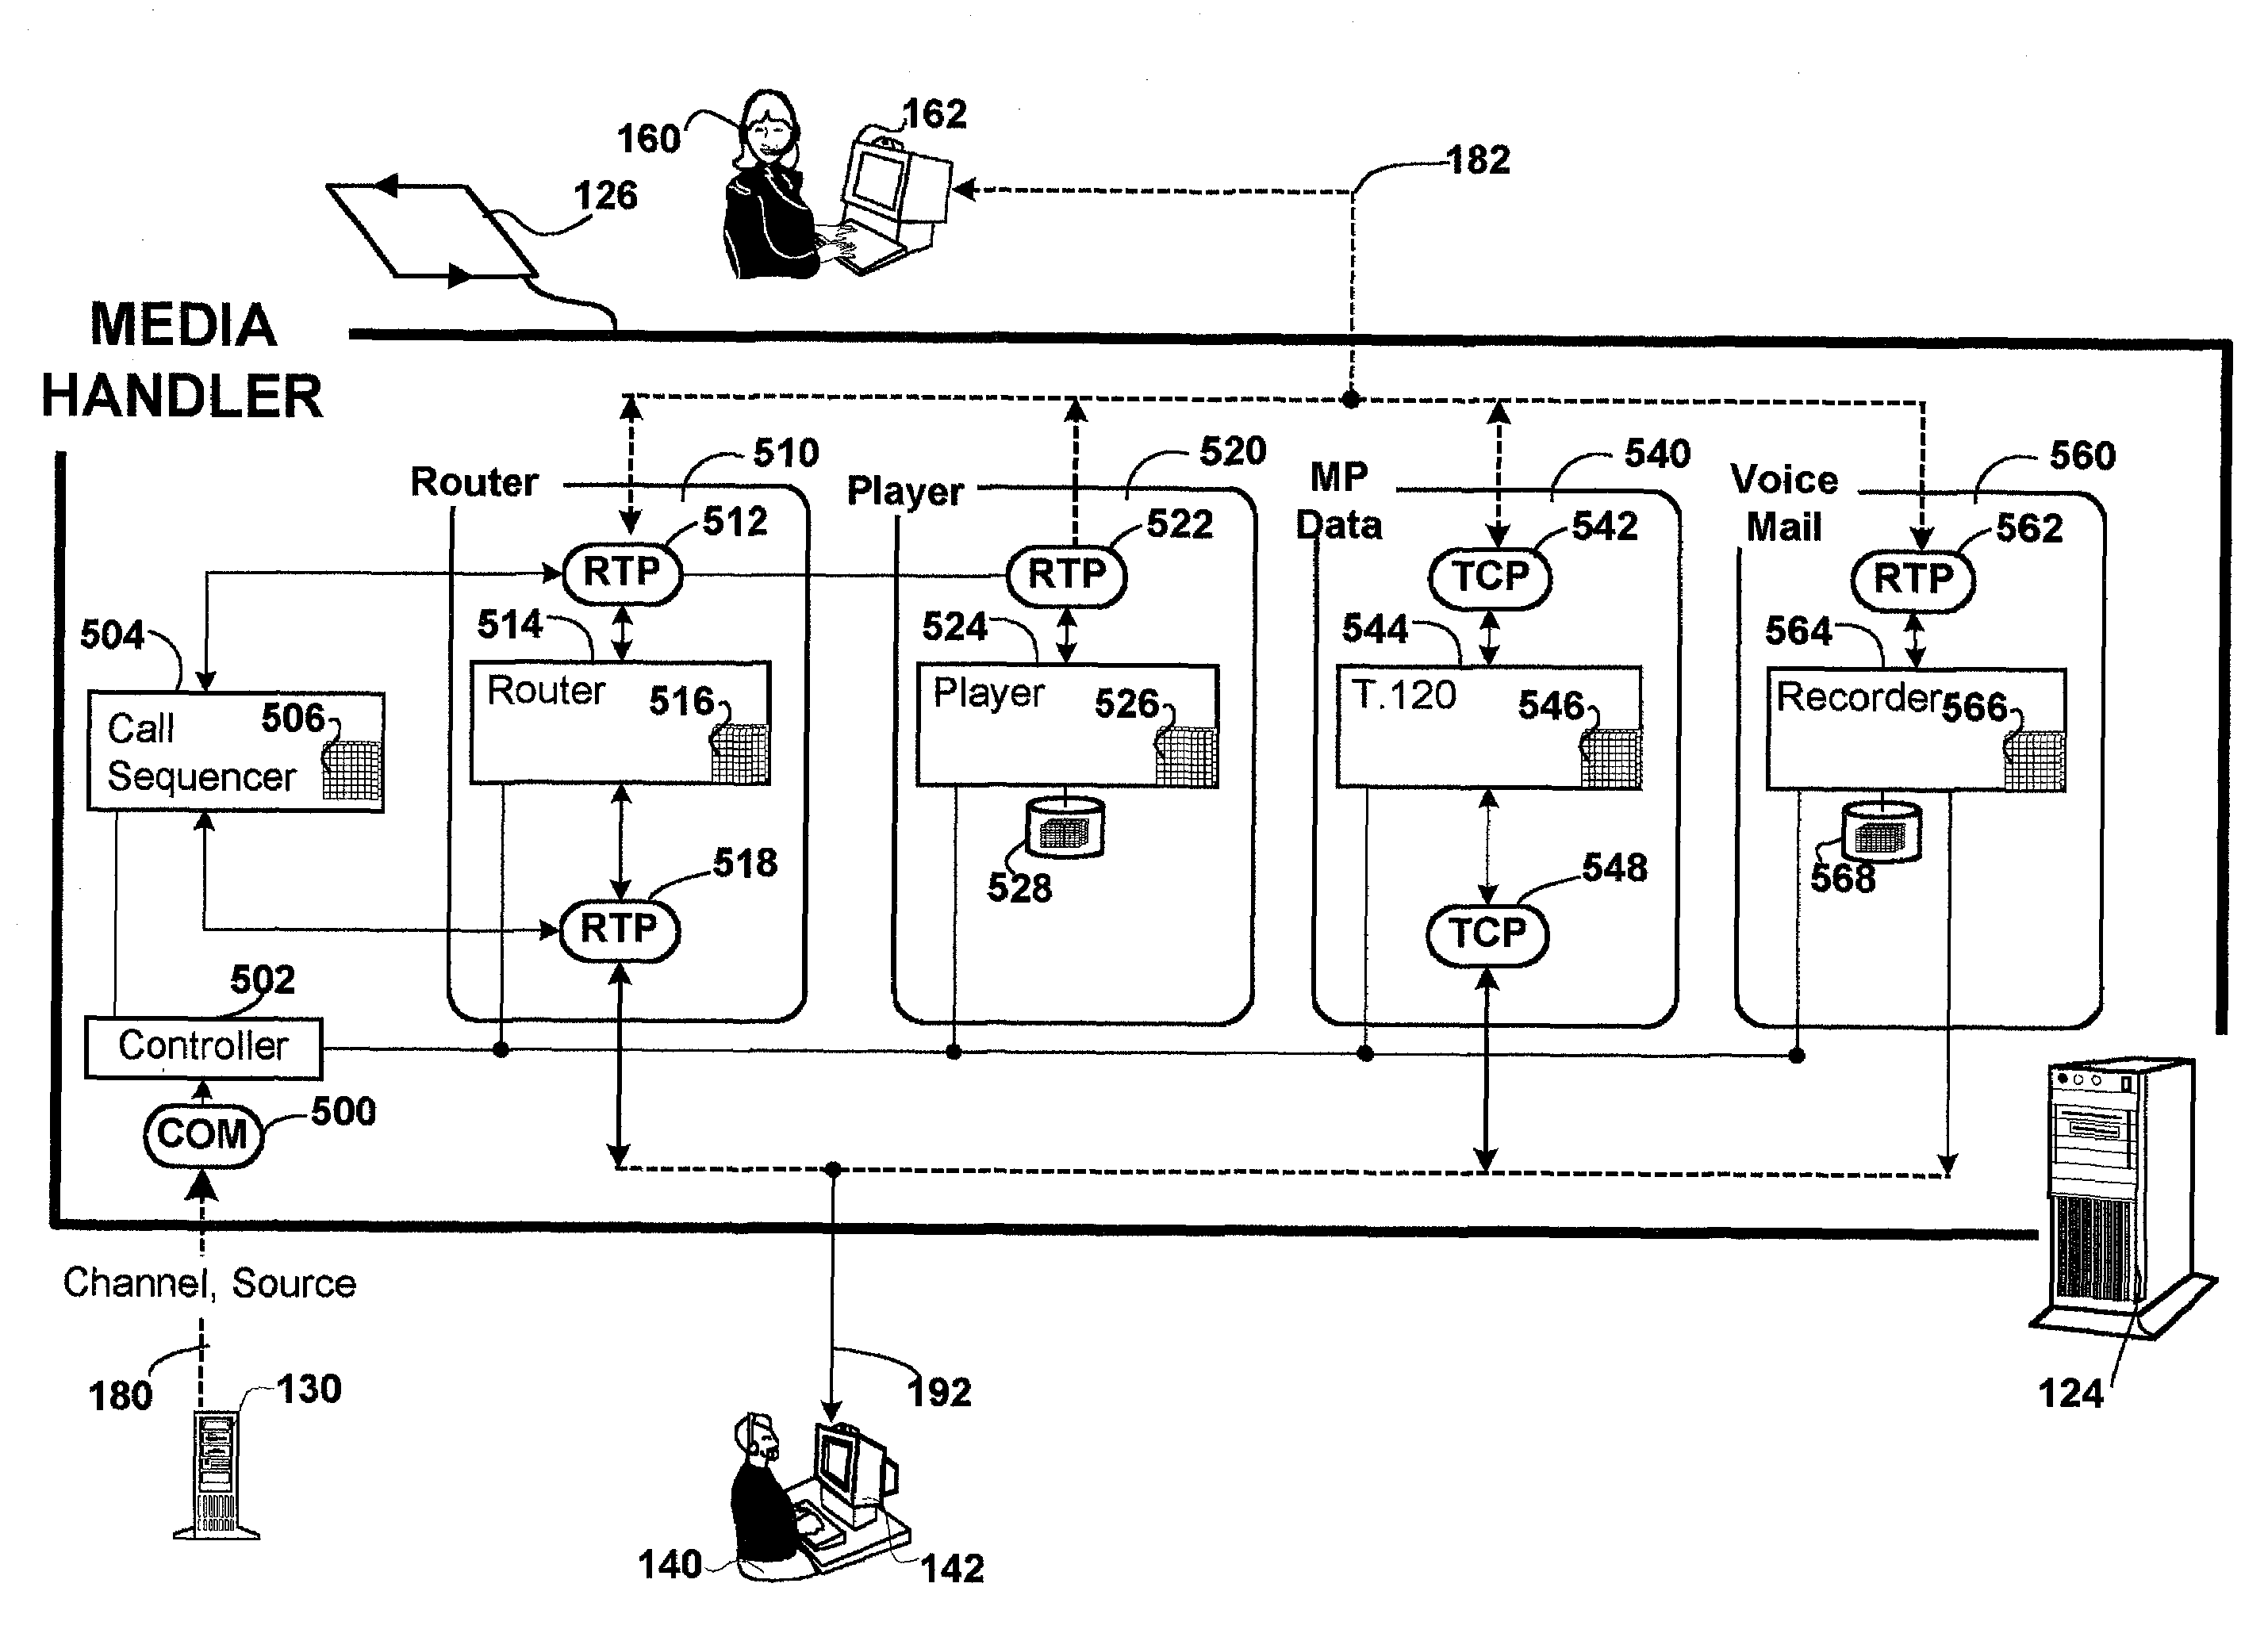 Method and apparatus for a business contact center